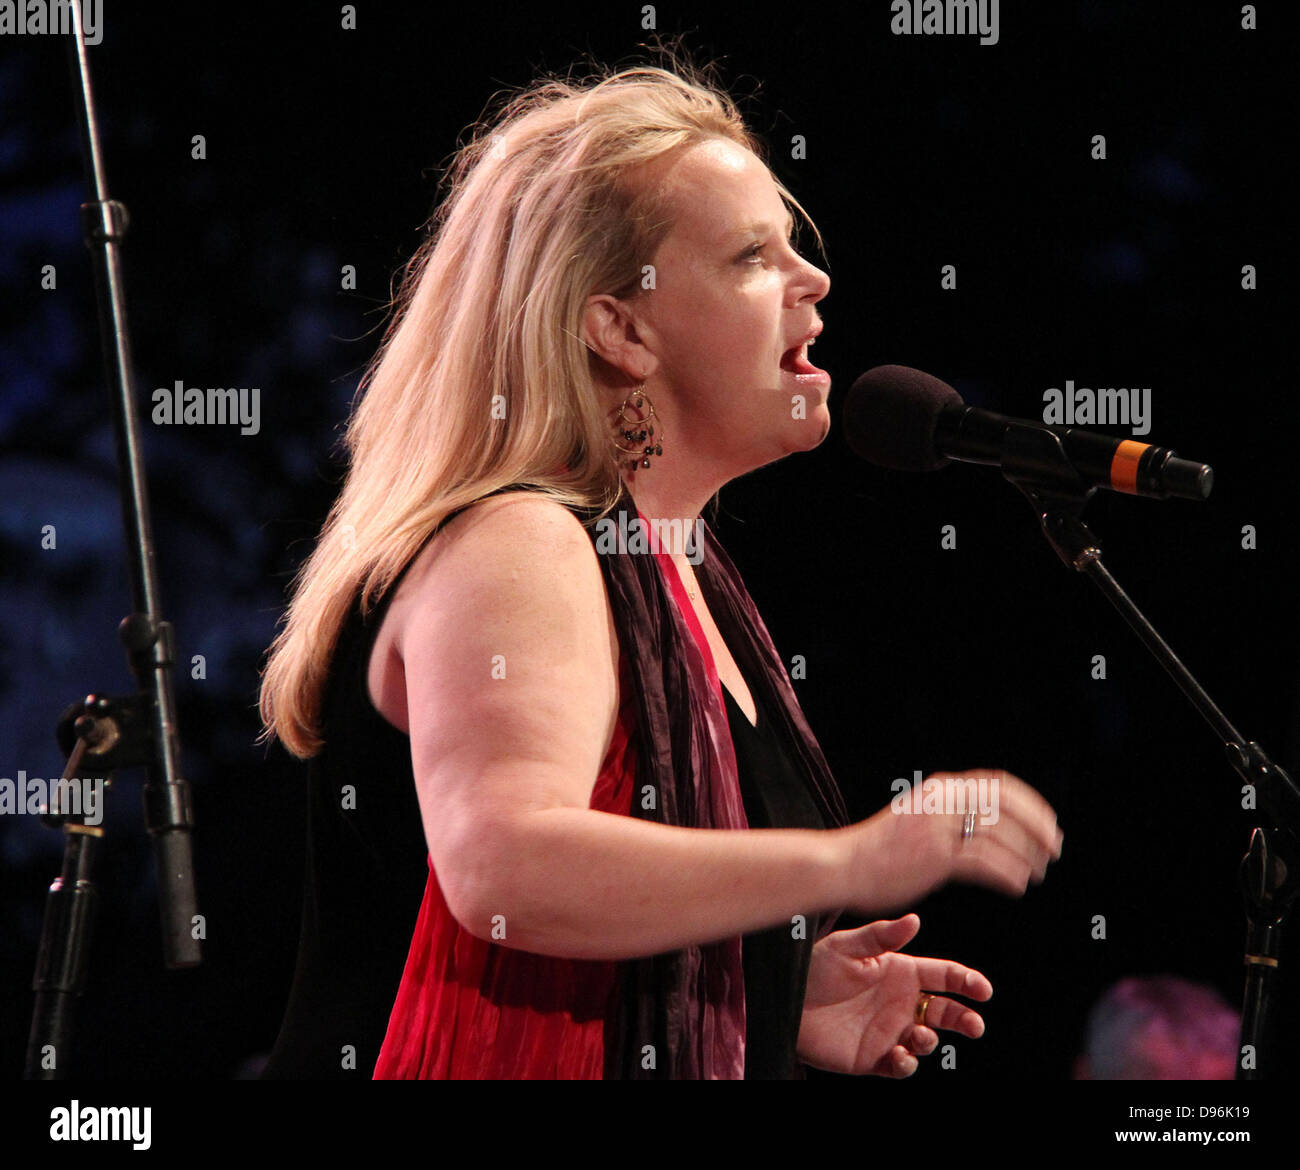 New York, U.S. June 11, 2013. Singer MARY CHAPIN CARPENTER performs during the 'Sinatra In The Park: An Evening Celebrating the Musical Genius of Frank Sinatra' concert presented by the City Parks Foundation Gala, an annual fundraising event, held at SummerStage in Central Park. Credit:  ZUMA Press, Inc./Alamy Live News Stock Photo